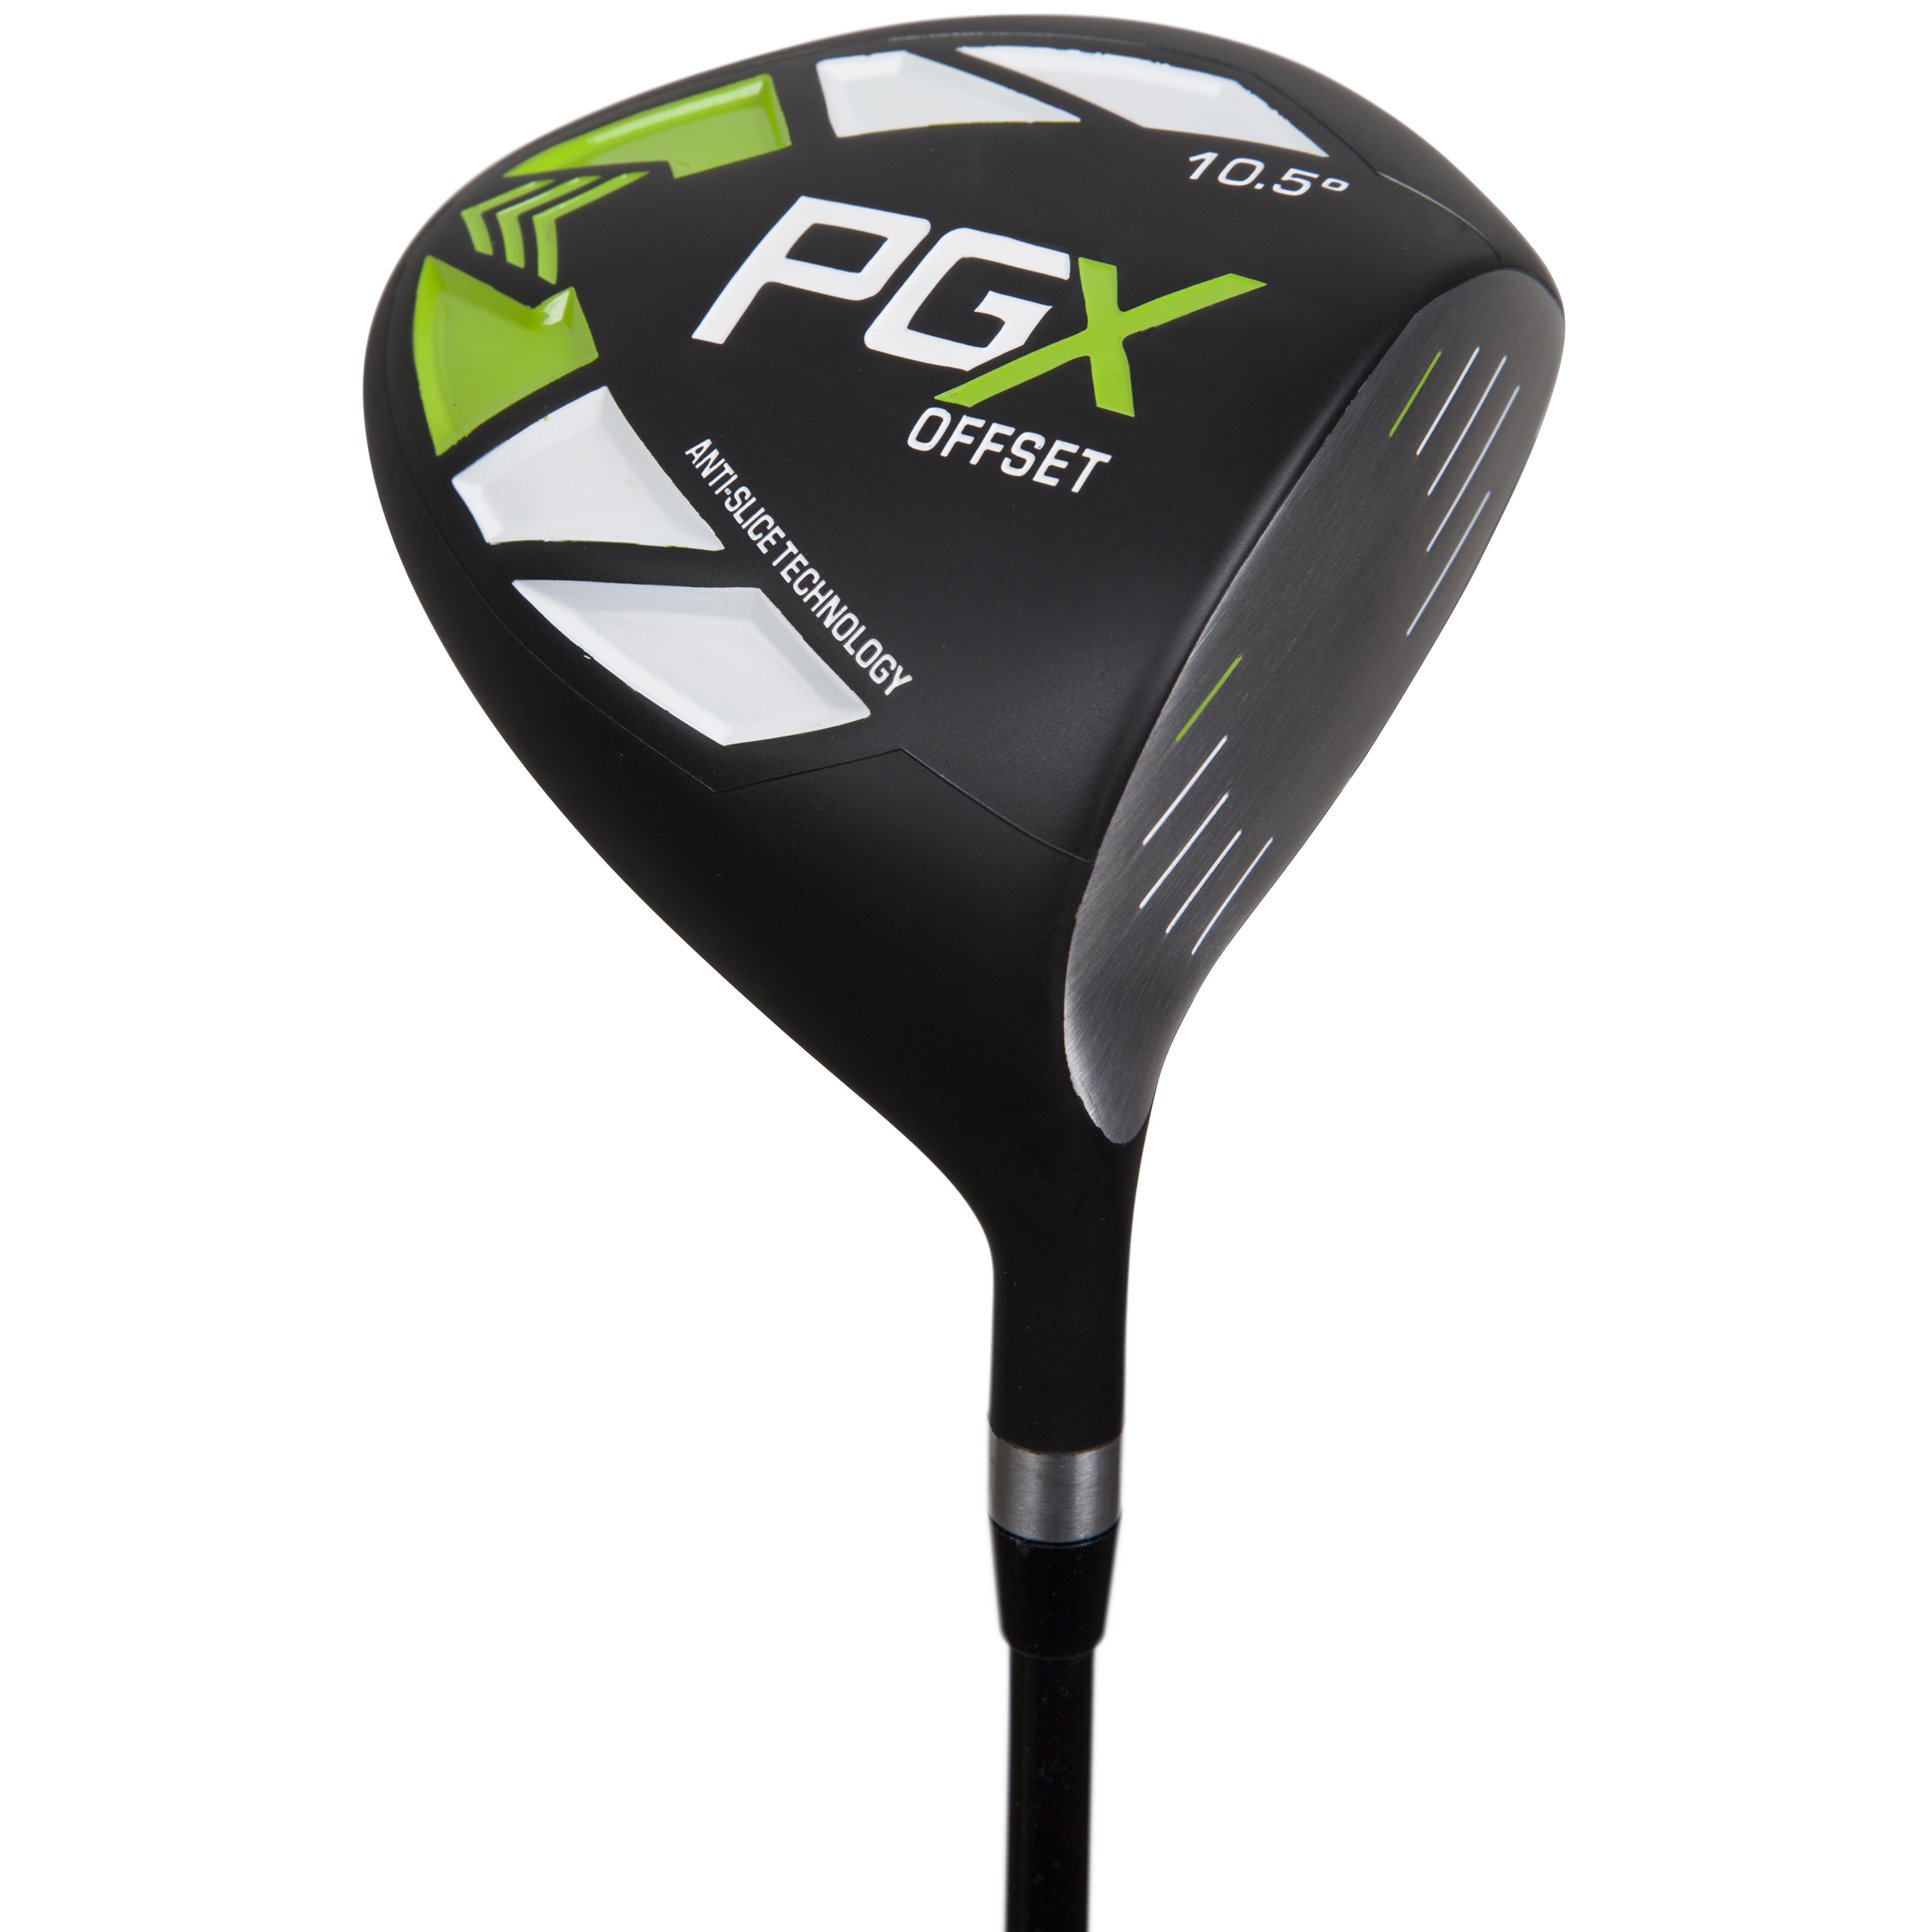 Pinemeadow Golf PGX Offset Driver - image 2 of 5